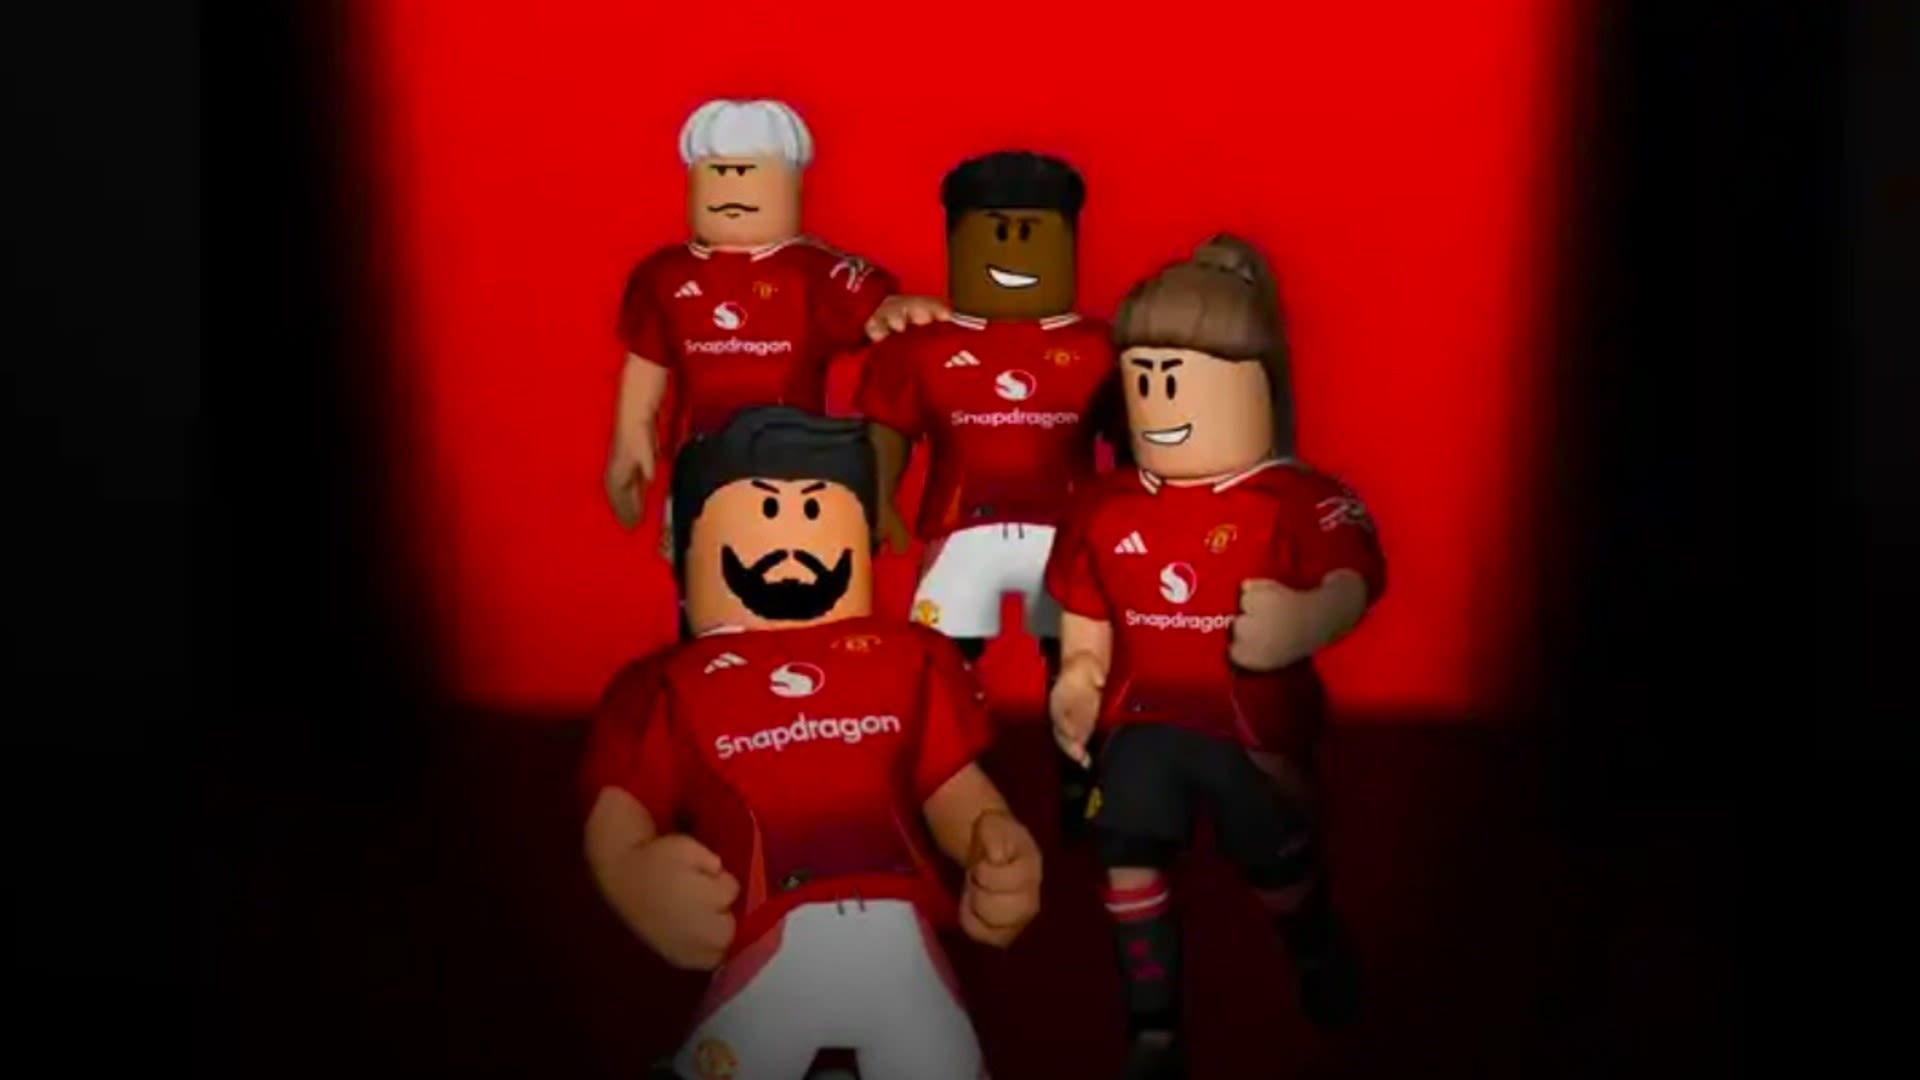 It might not be coming home, but Manchester United is coming to Roblox